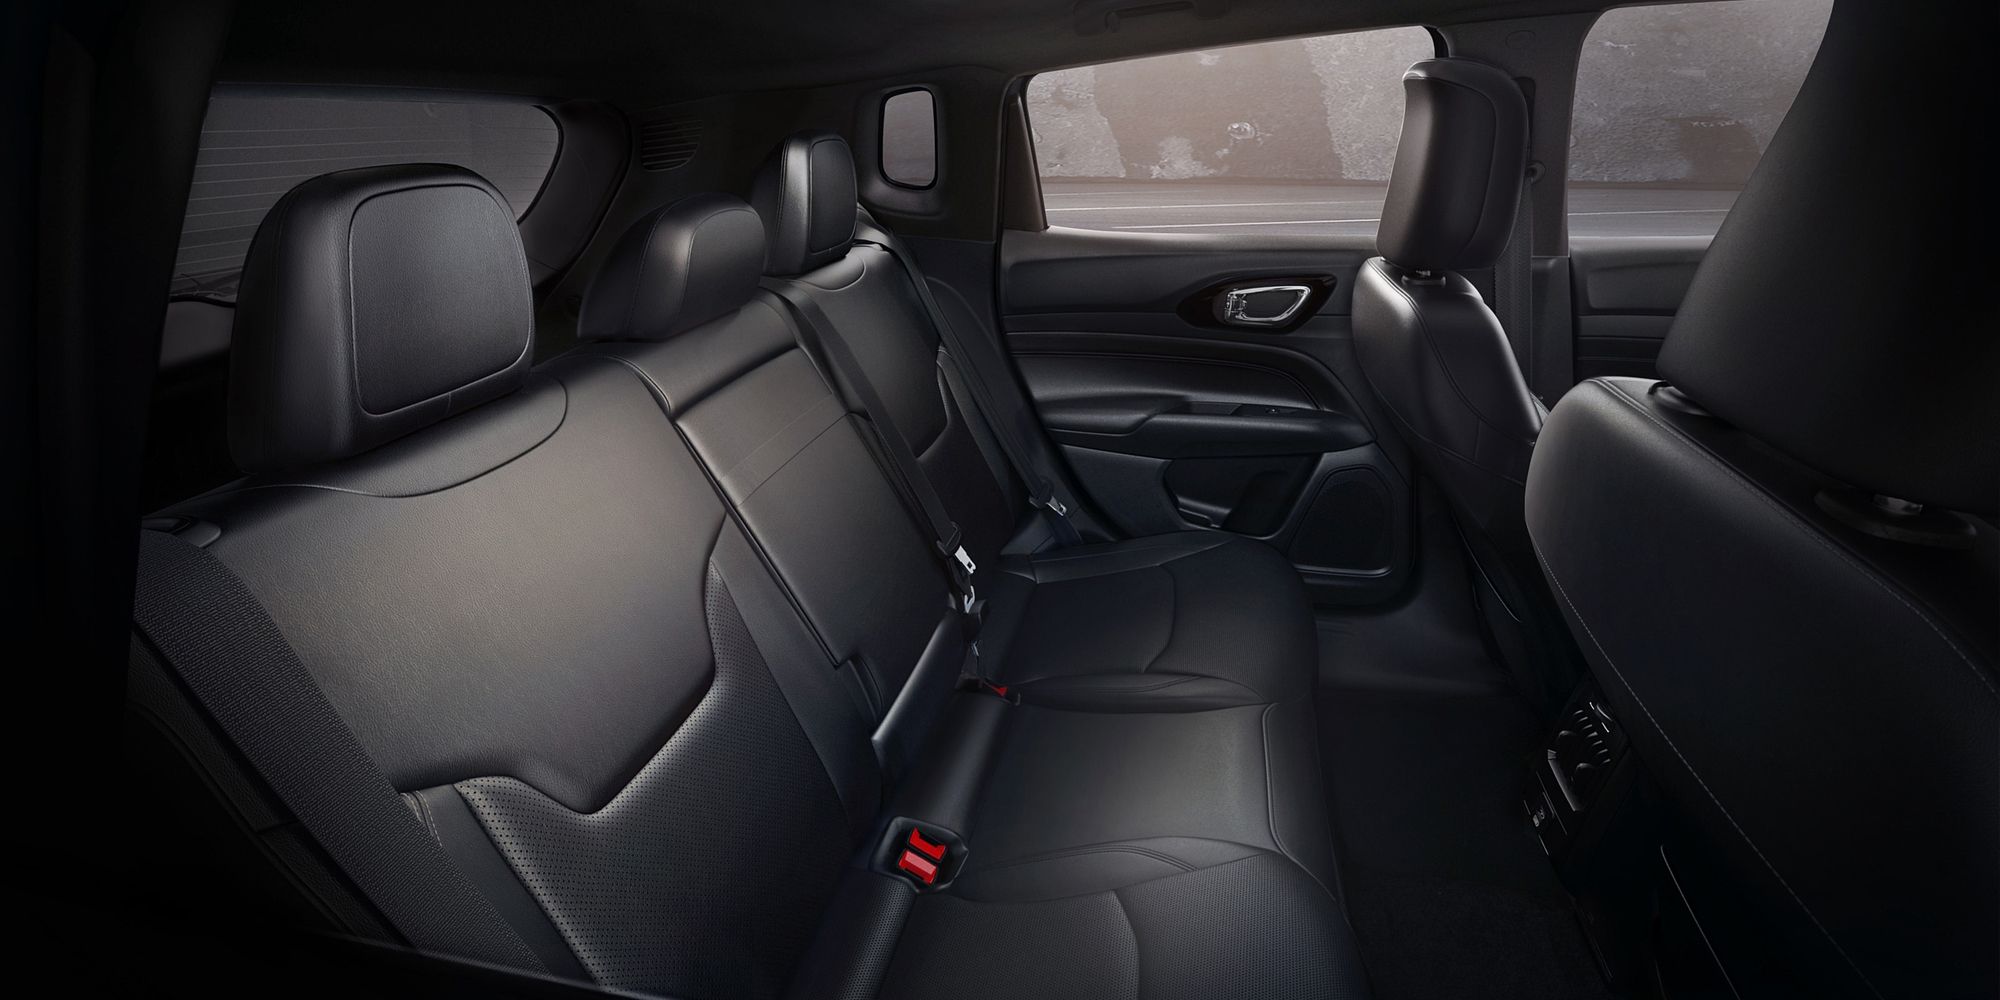 The rear seats in the 2022 Compass